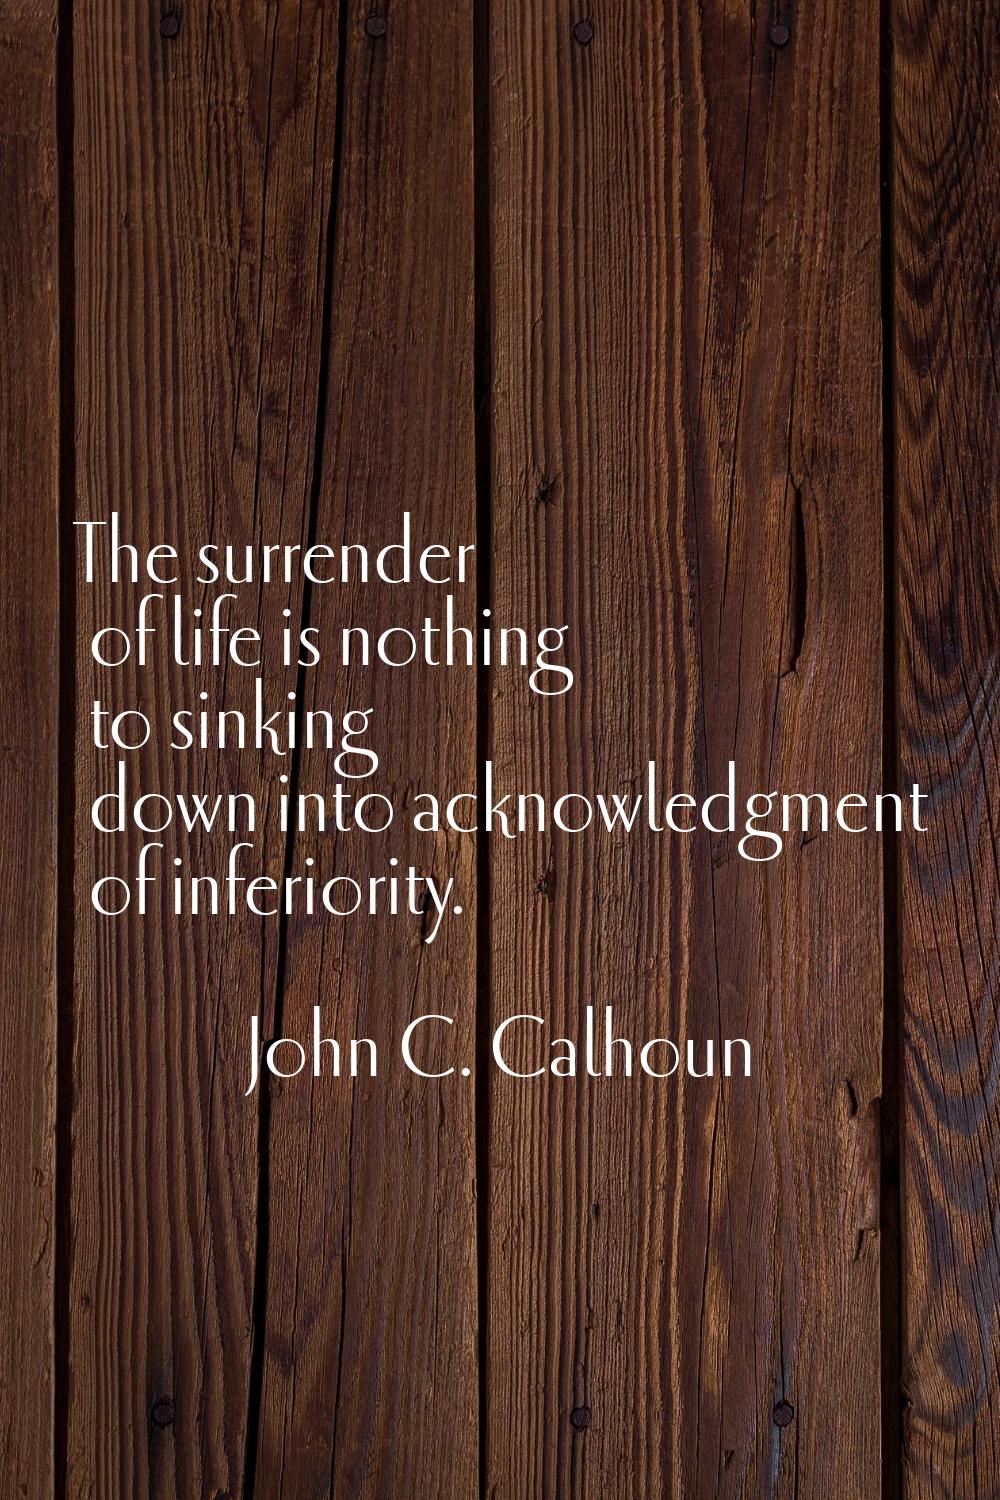 The surrender of life is nothing to sinking down into acknowledgment of inferiority.